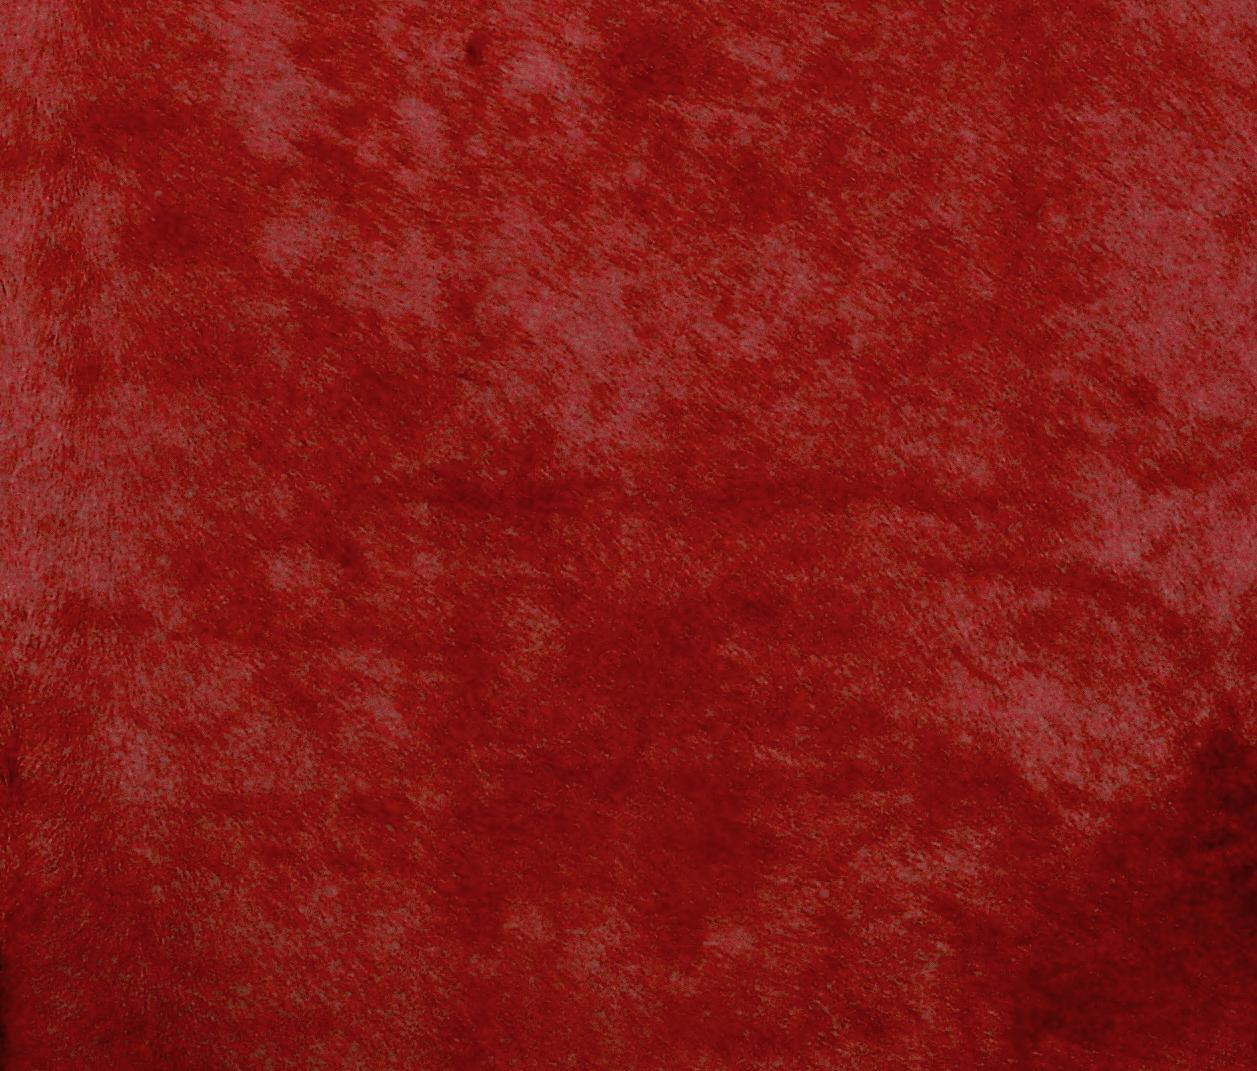 Real red Cowhide rug:

All of our Cowhide rugs are full hides and measure approximately 7' W x 8' L. They are of the highest quality from the French region of Normandy and naturally raised in a free roaming field. The hair of these cows is very